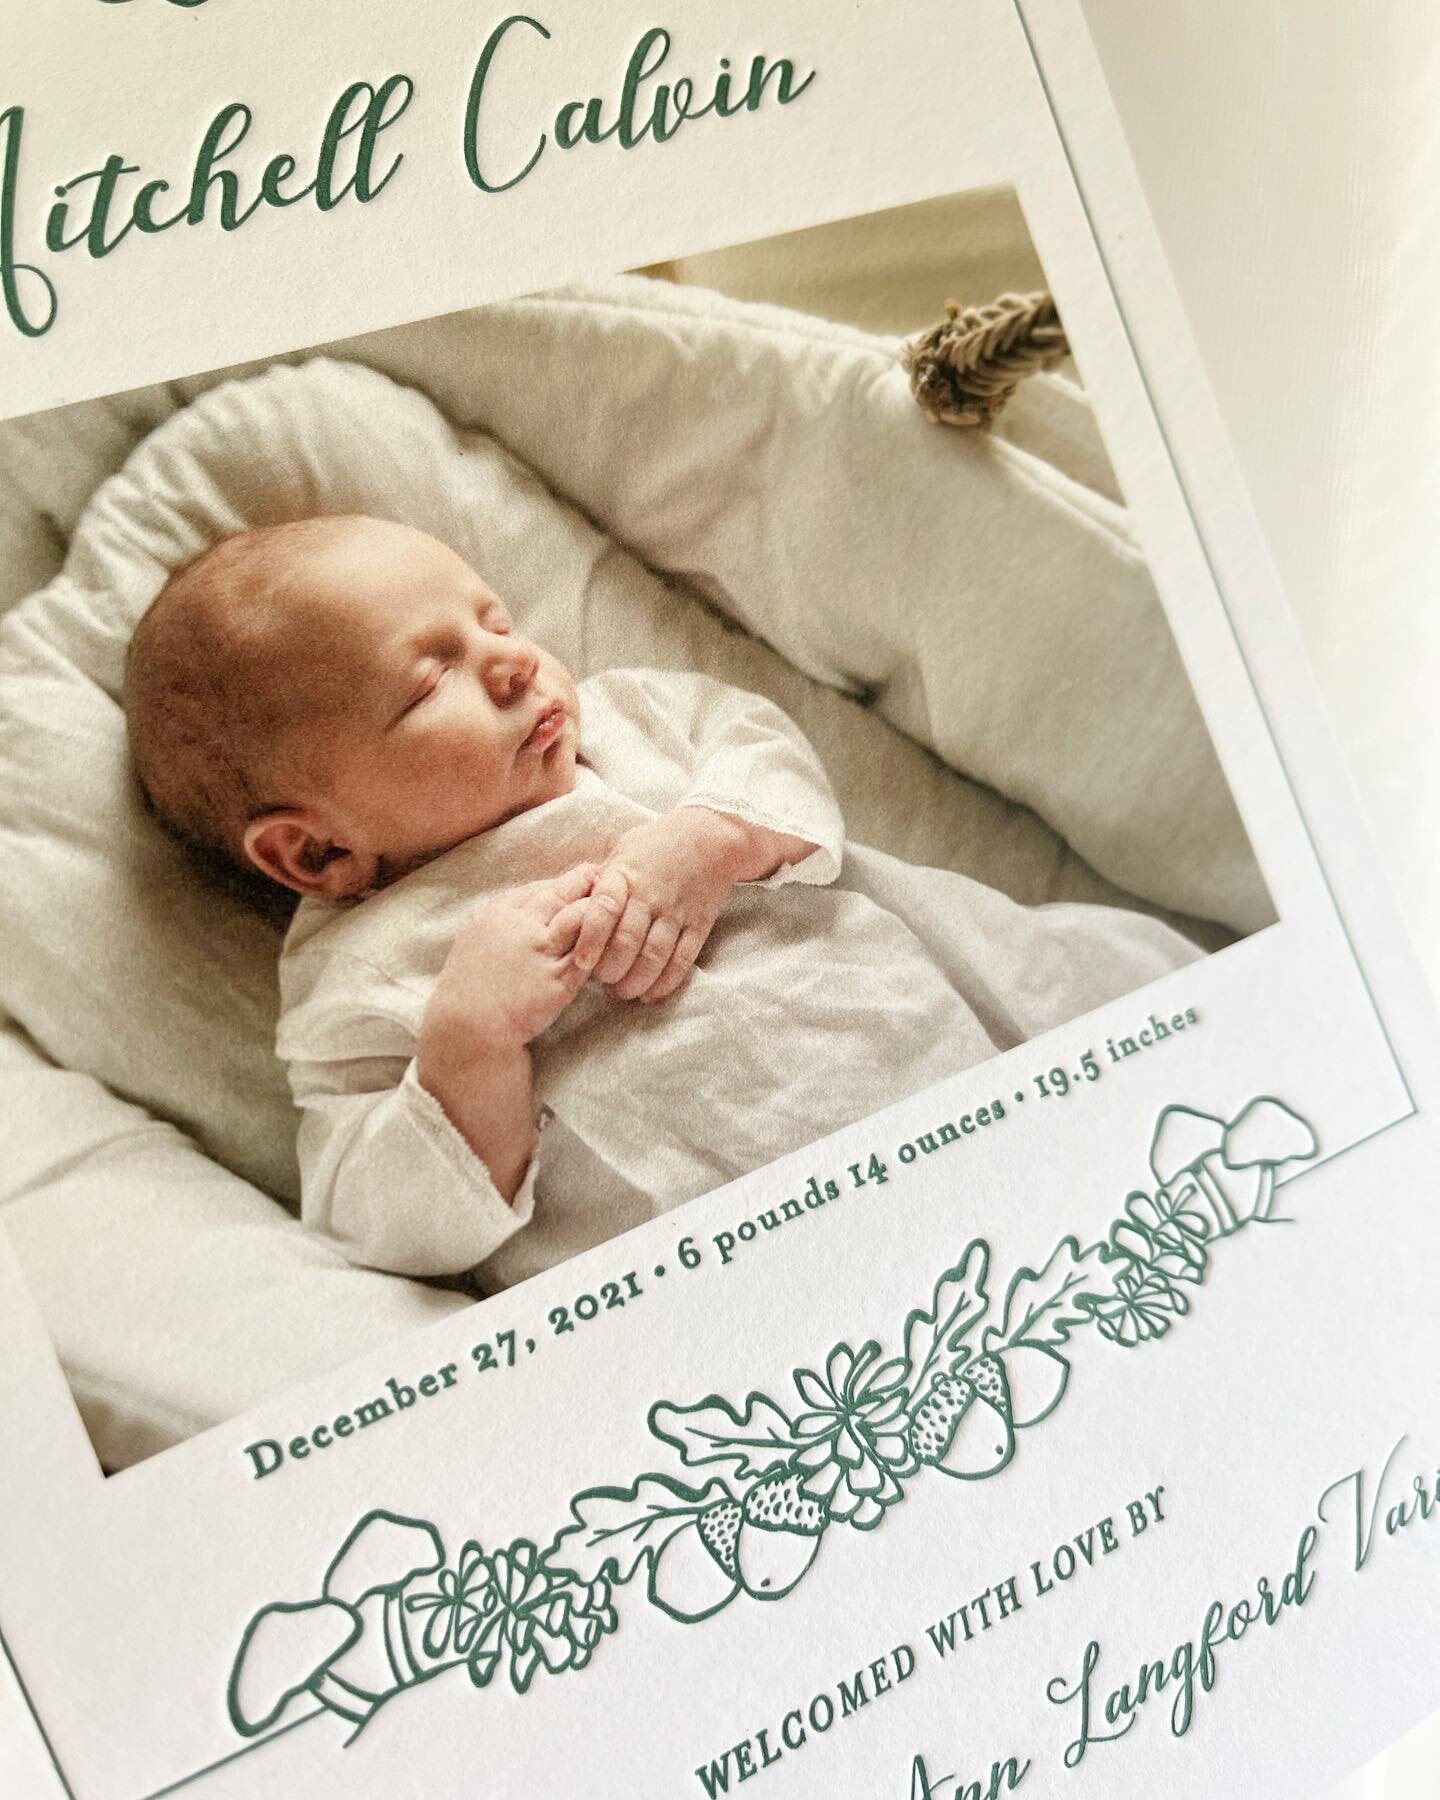 The first thing I designed post design school was a birth announcement. Still doing it 14 years later. 

I hope you think of me when you have a life event to celebrate 💕